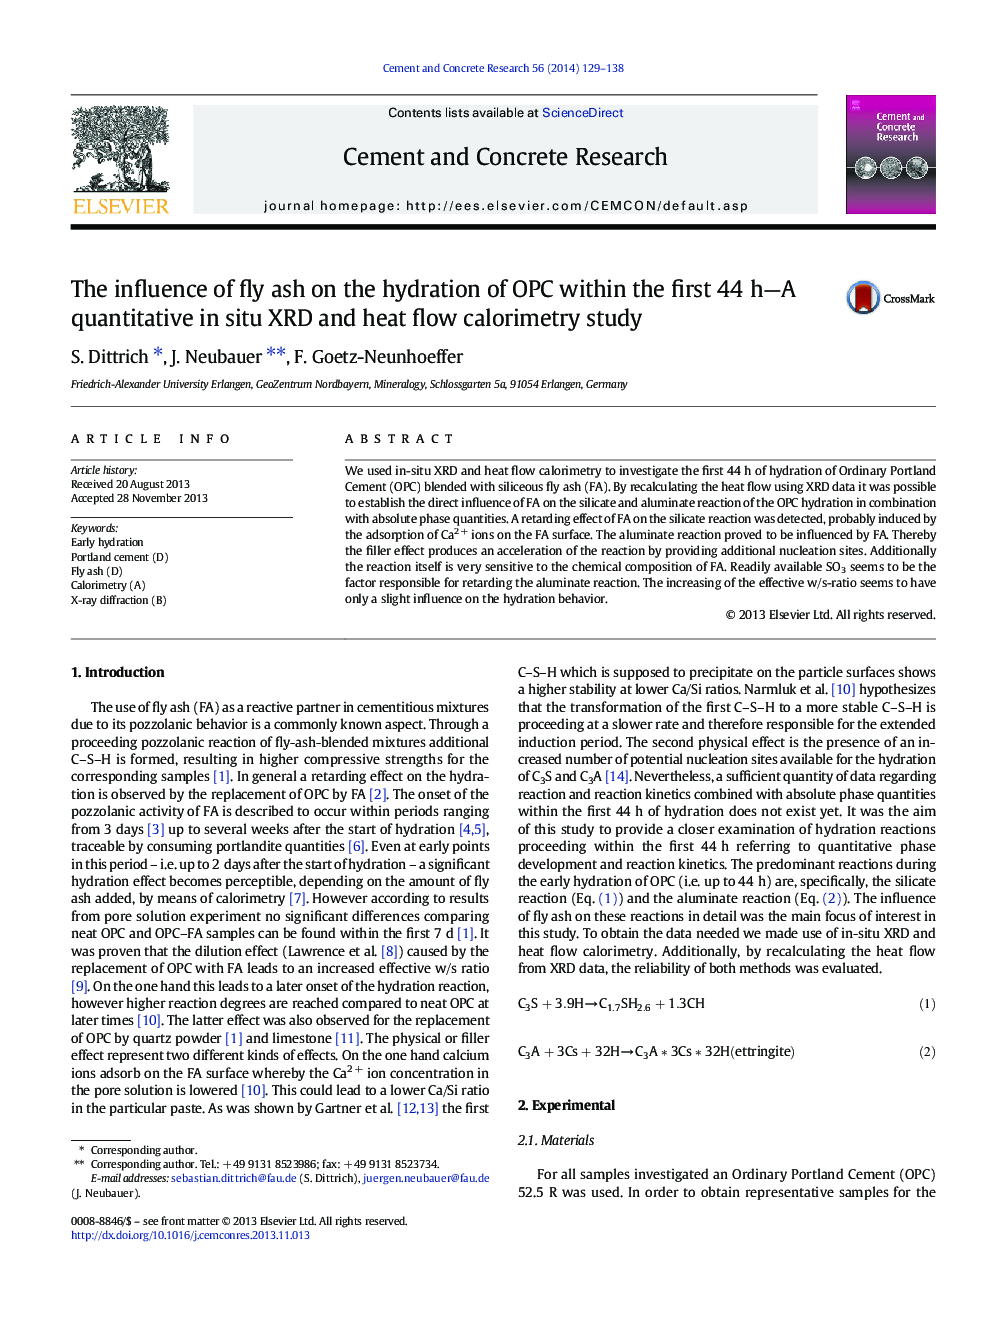 The influence of fly ash on the hydration of OPC within the first 44Â h-A quantitative in situ XRD and heat flow calorimetry study